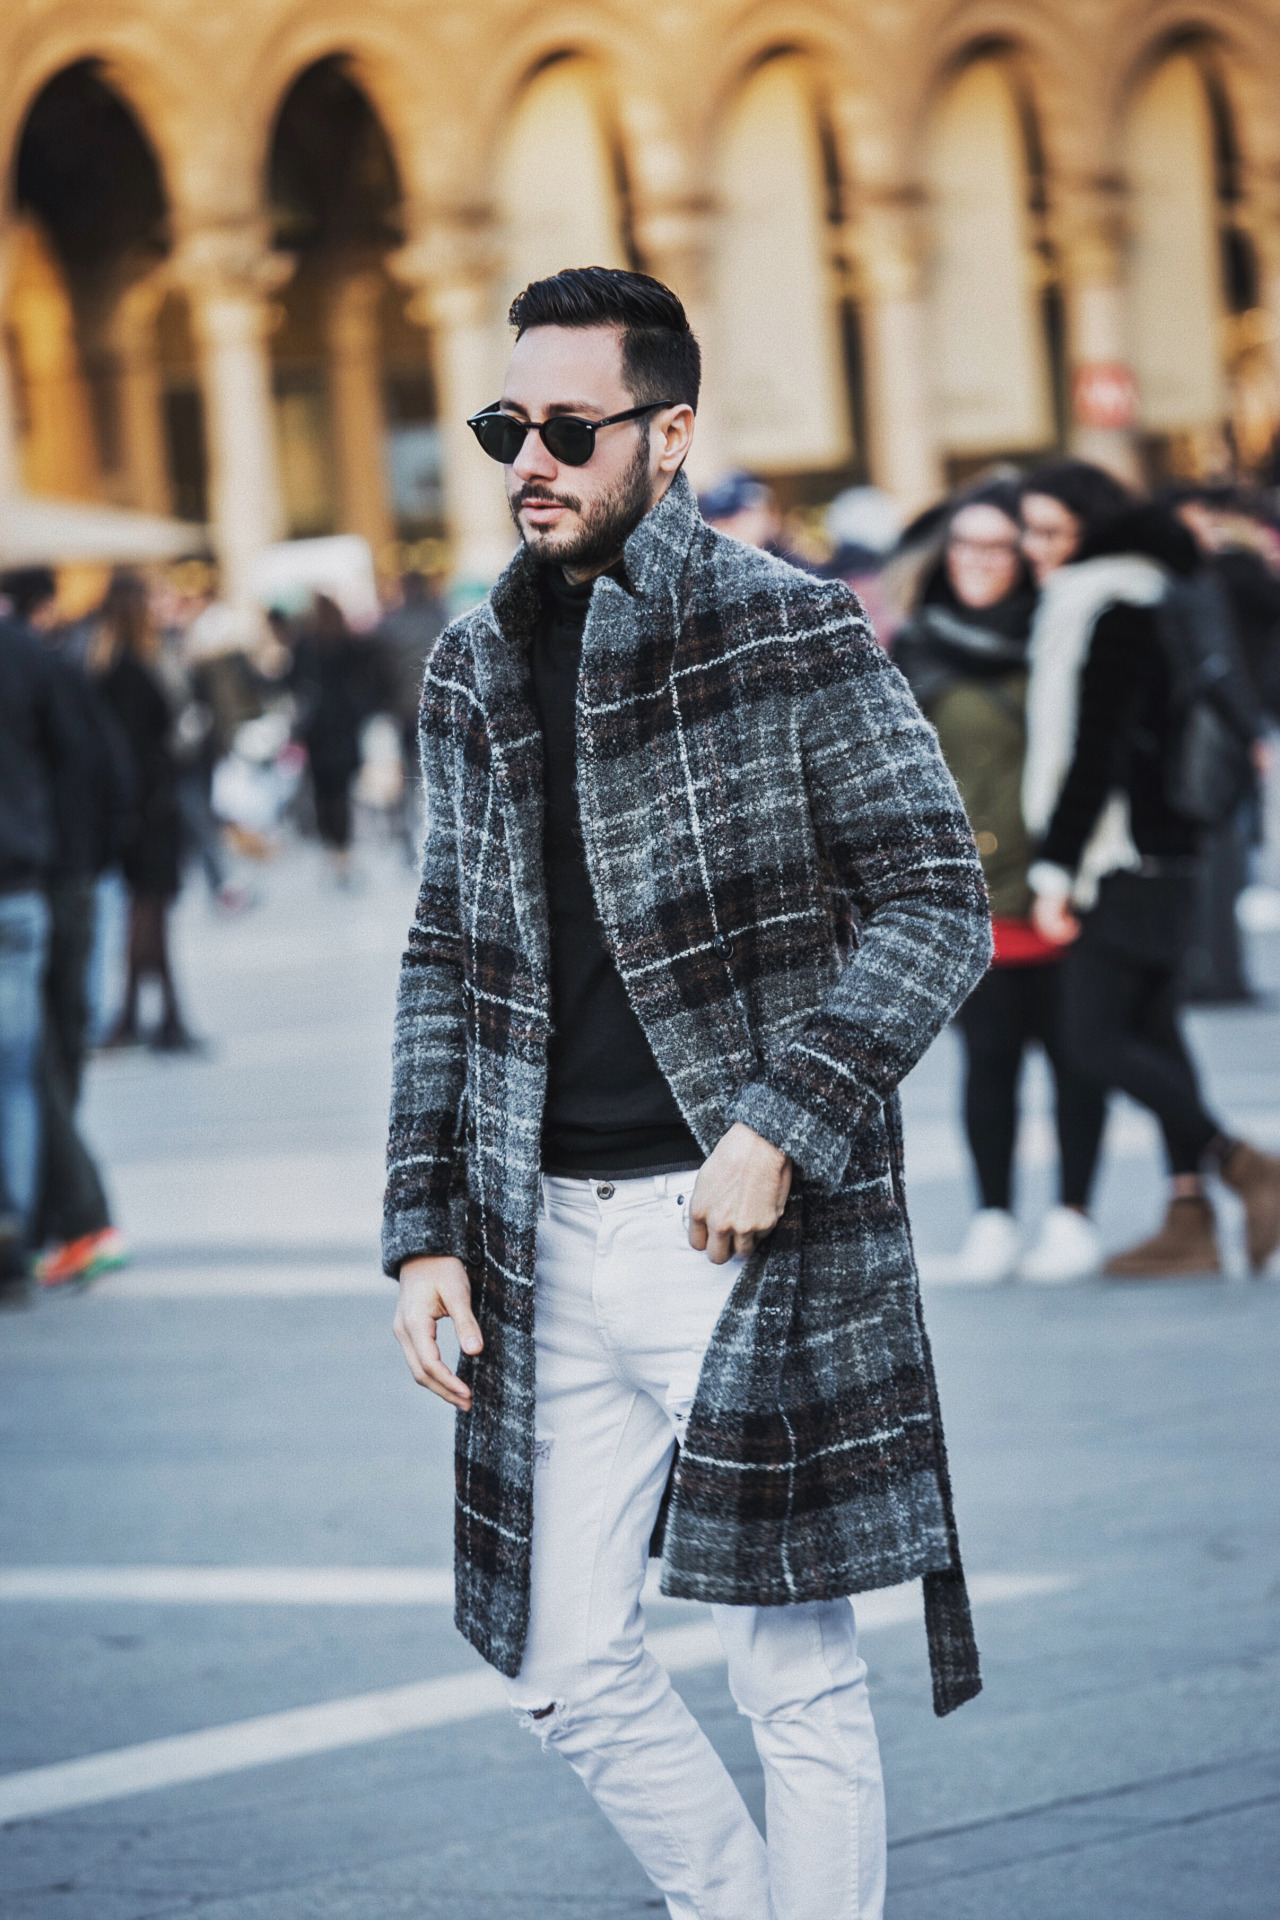 REYALFASHION - BLOGGER IN MILAN I was just in Milan for the first...